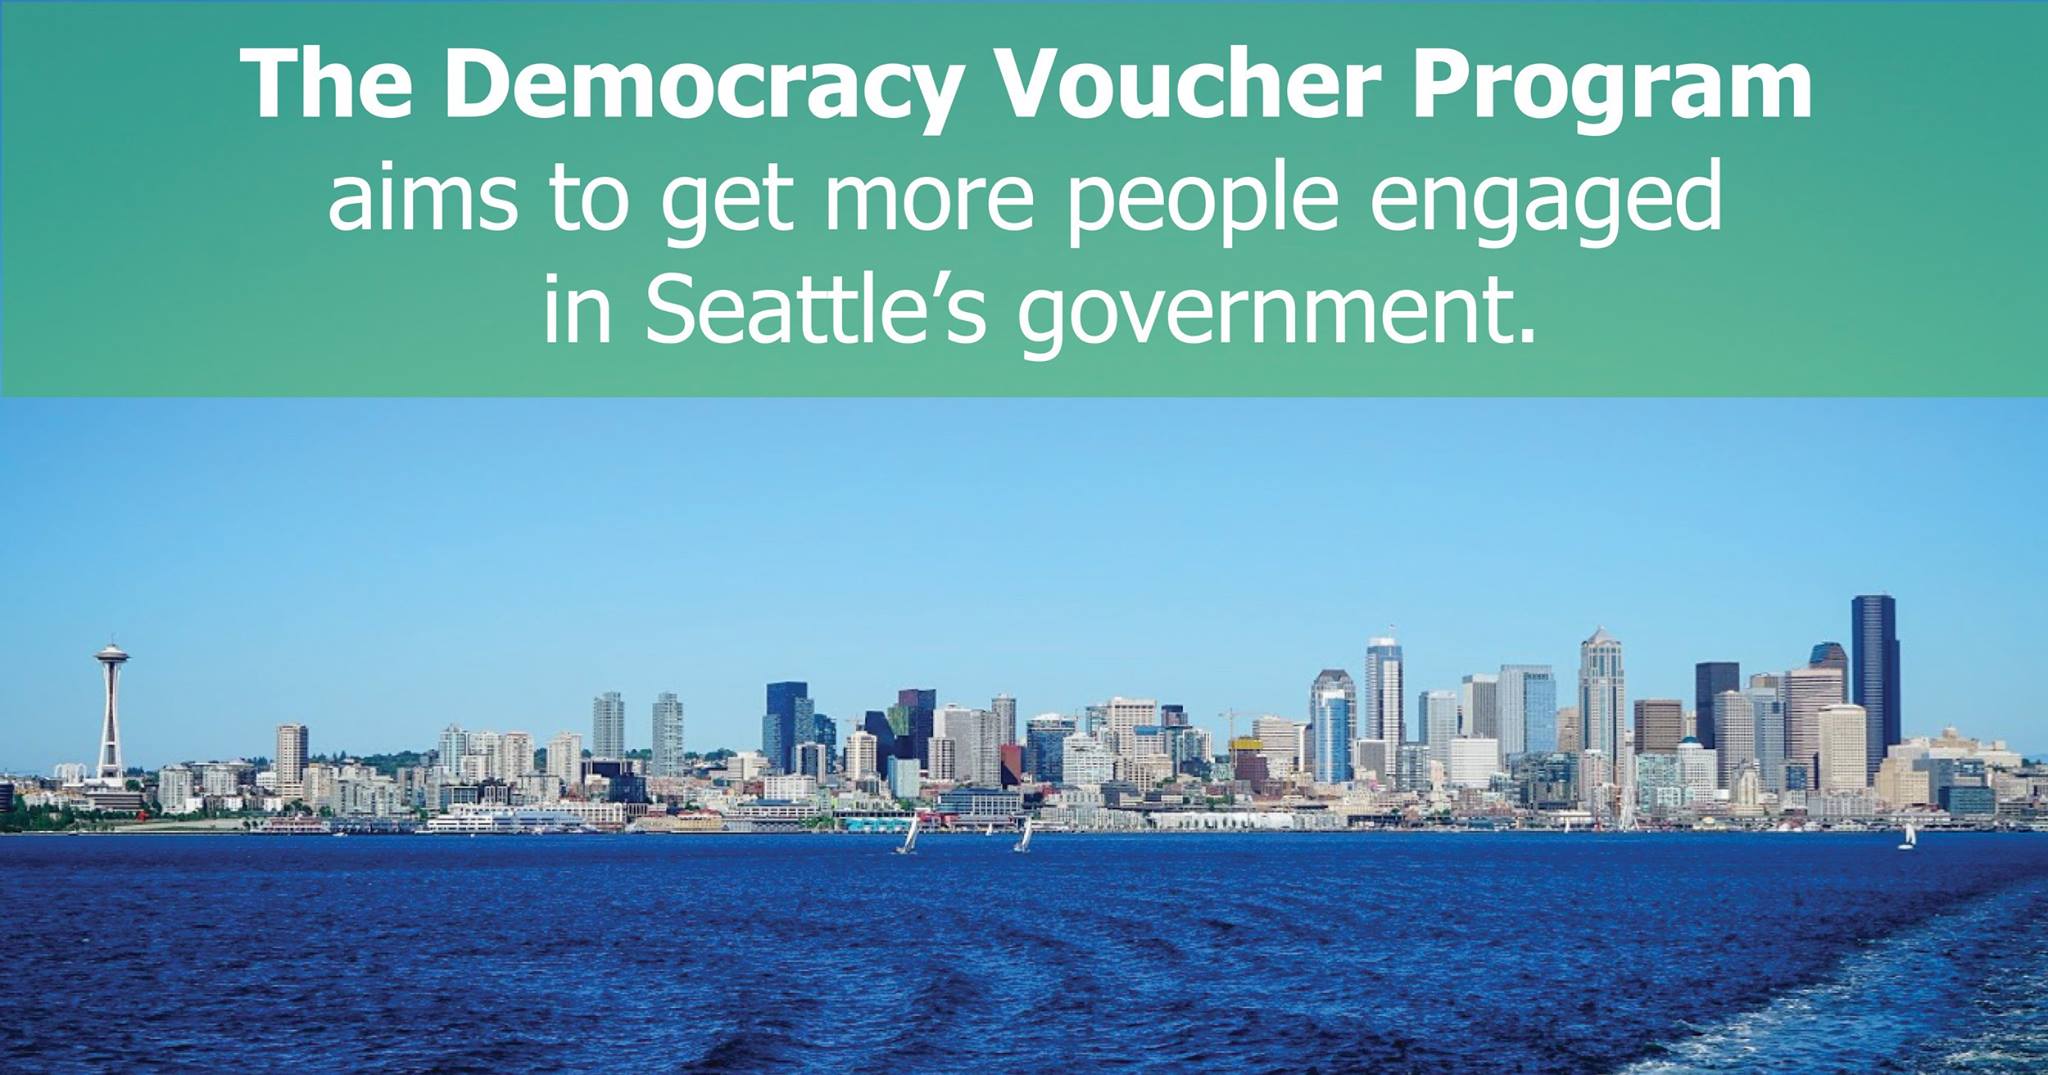 Corporate Interests Fall Short in Fight for Seattle’s Soul - Proteus Fund